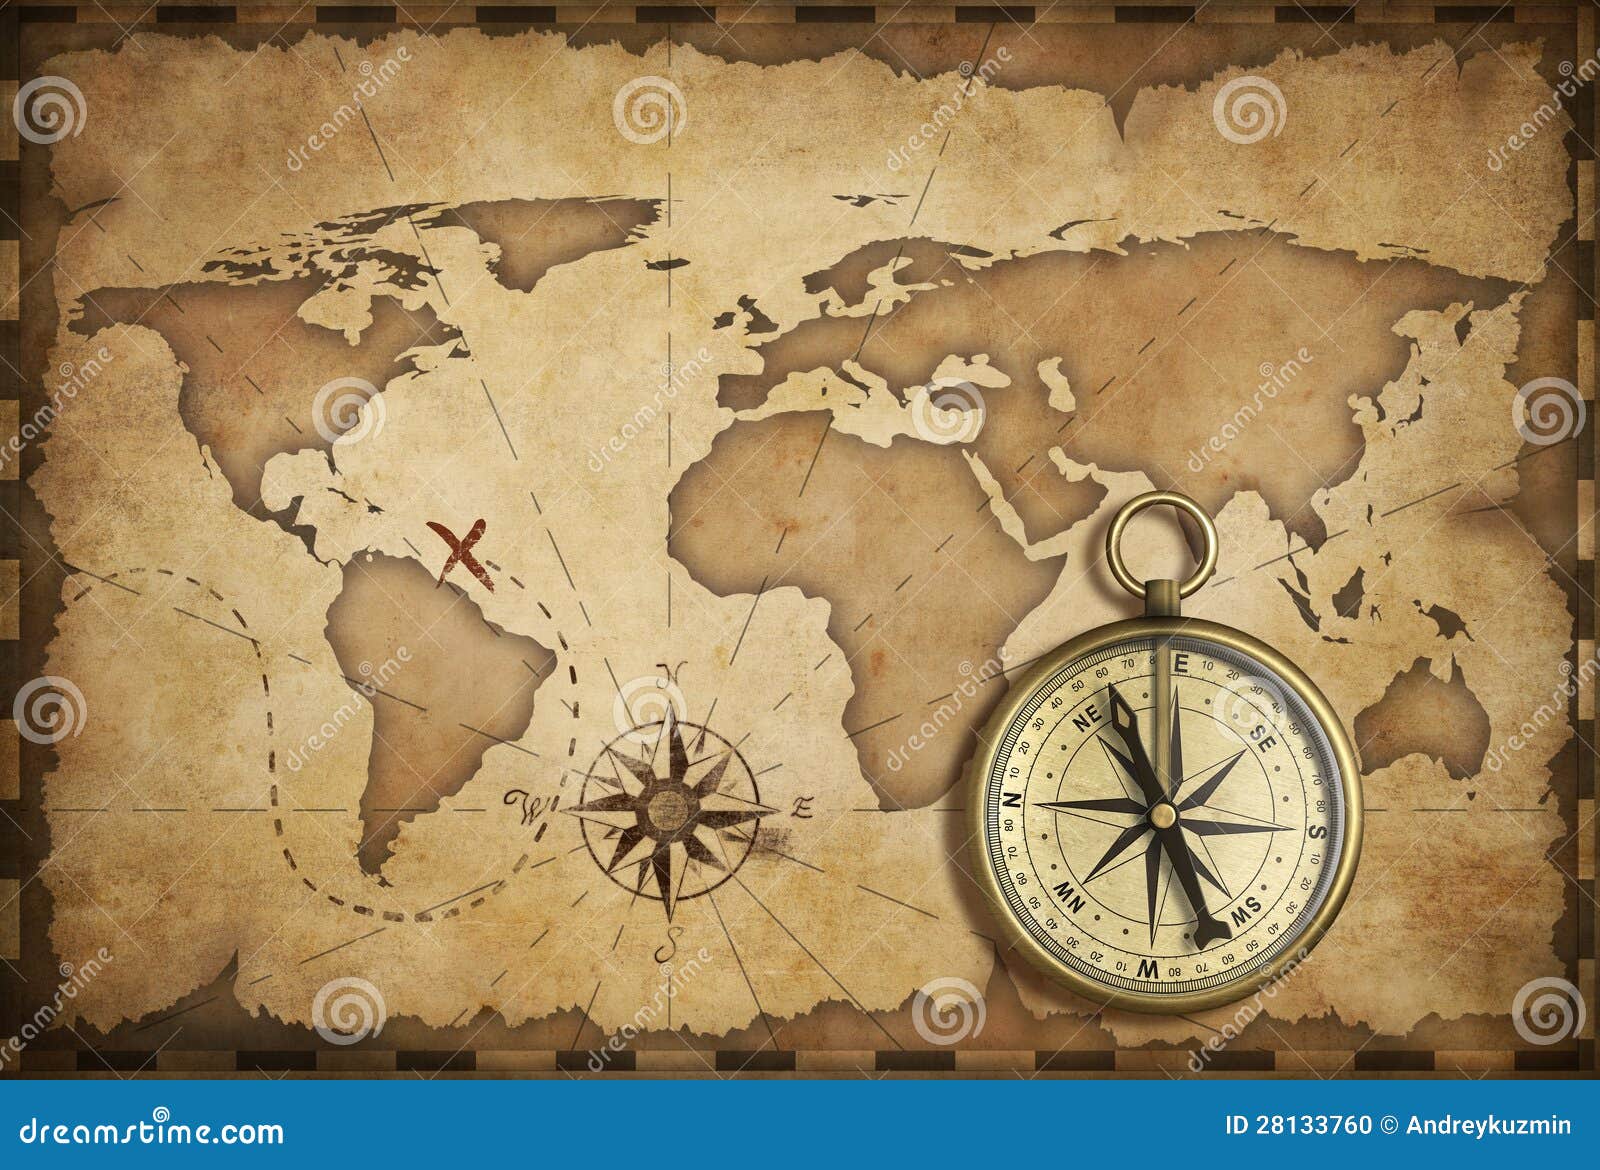 aged brass antique nautical compass and old map